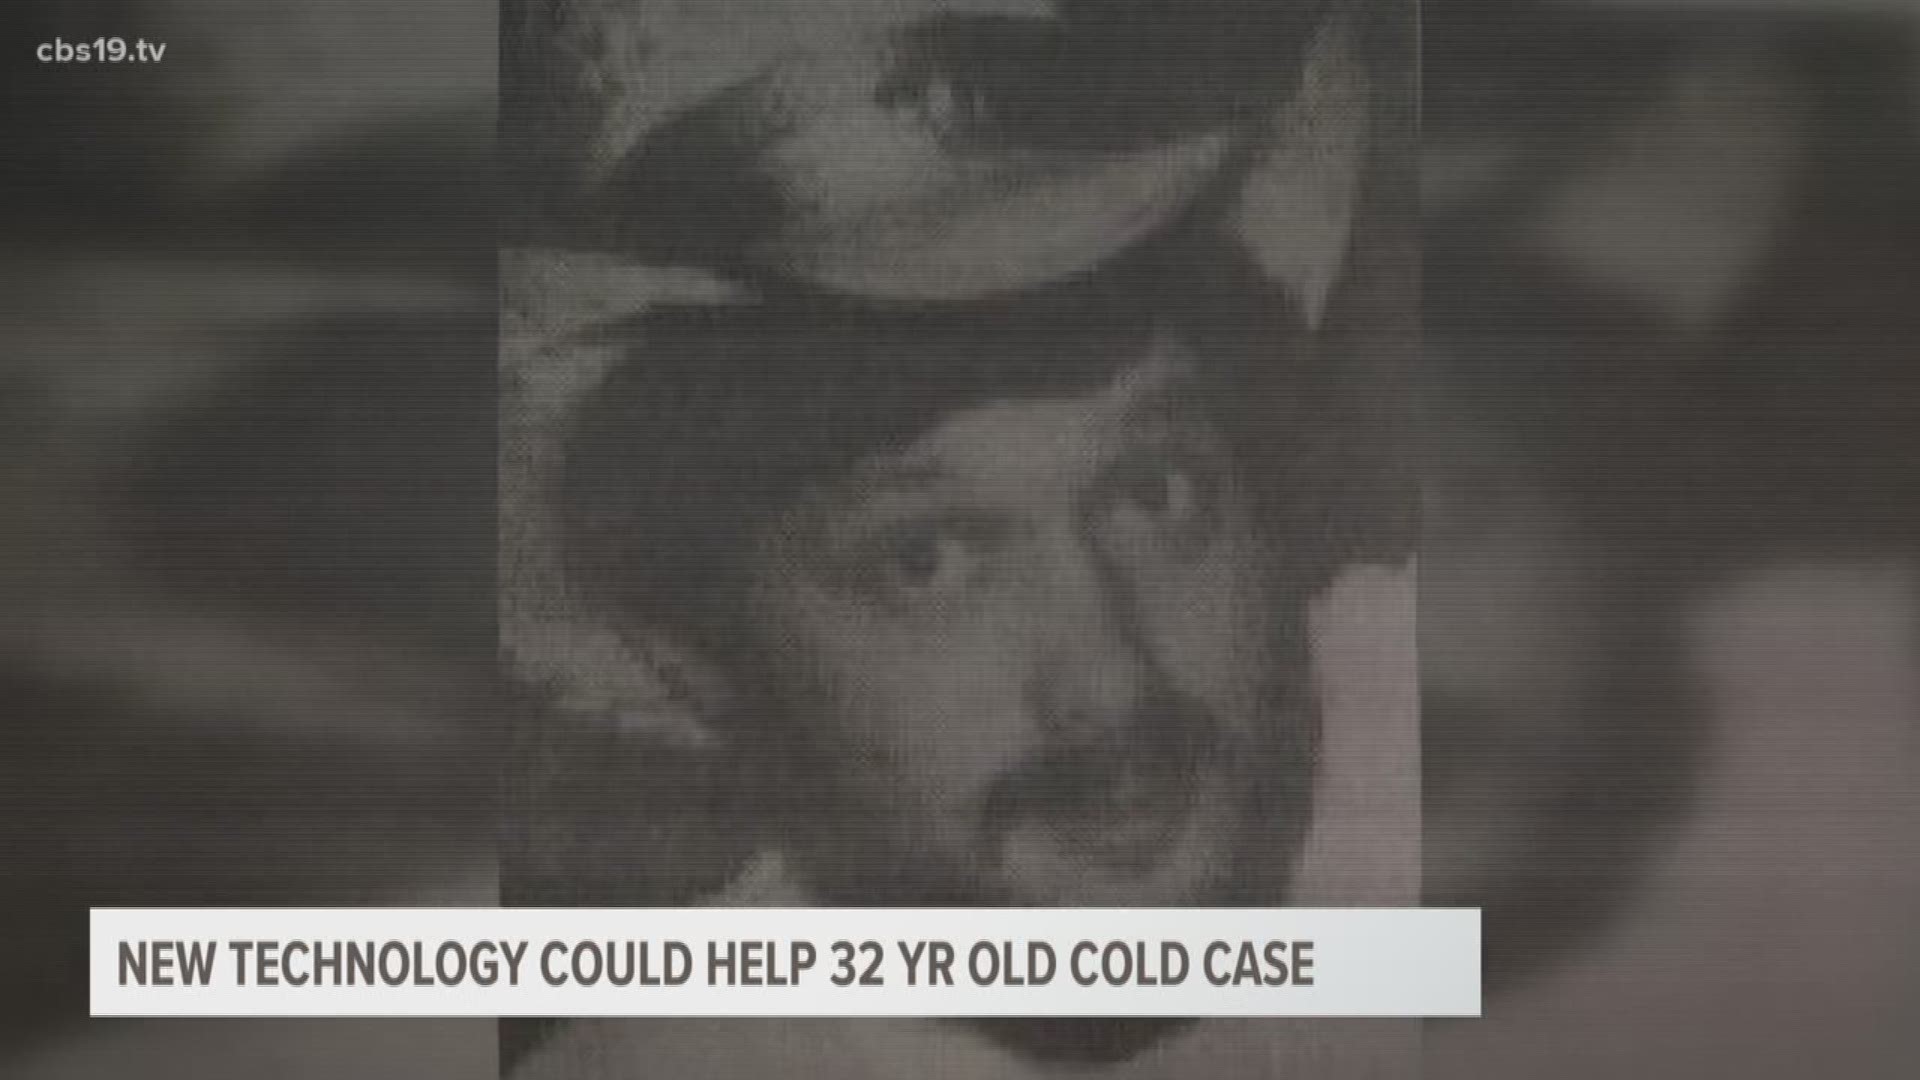 On the morning of March 8, 1987, Rickey Gene Herriage was found murdered in Athens. However, new technology is processing evidence that may finally bring his family answers.